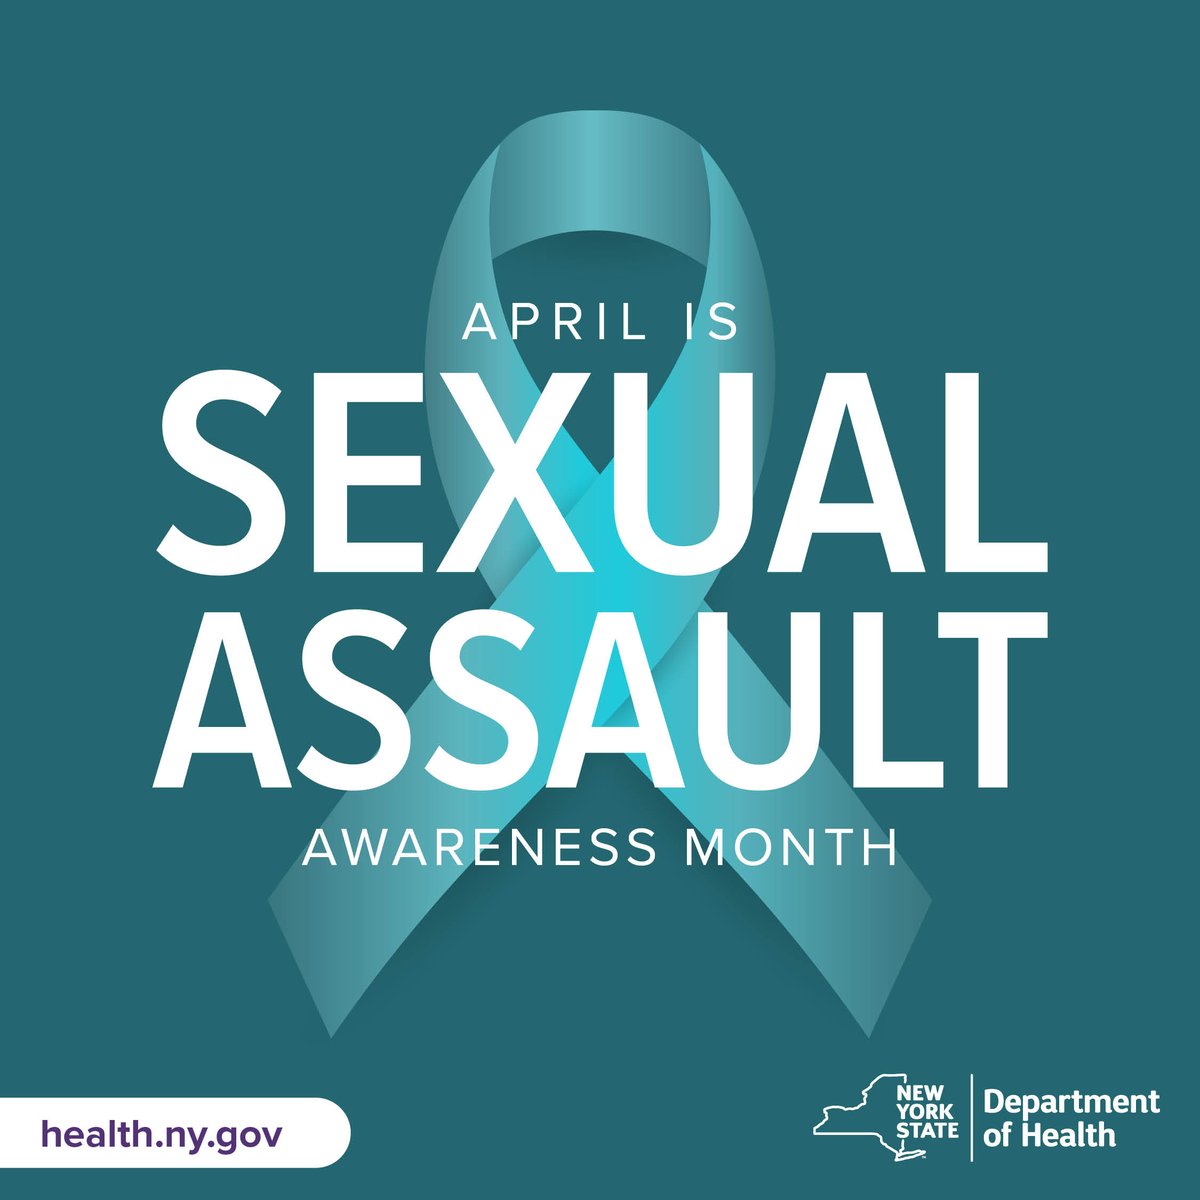 The State Health Department is committed to survivor-centered and culturally sensitive responses to sexual violence, while expanding and improving the public health response in New York State. More info: governor.ny.gov/news/governor-…